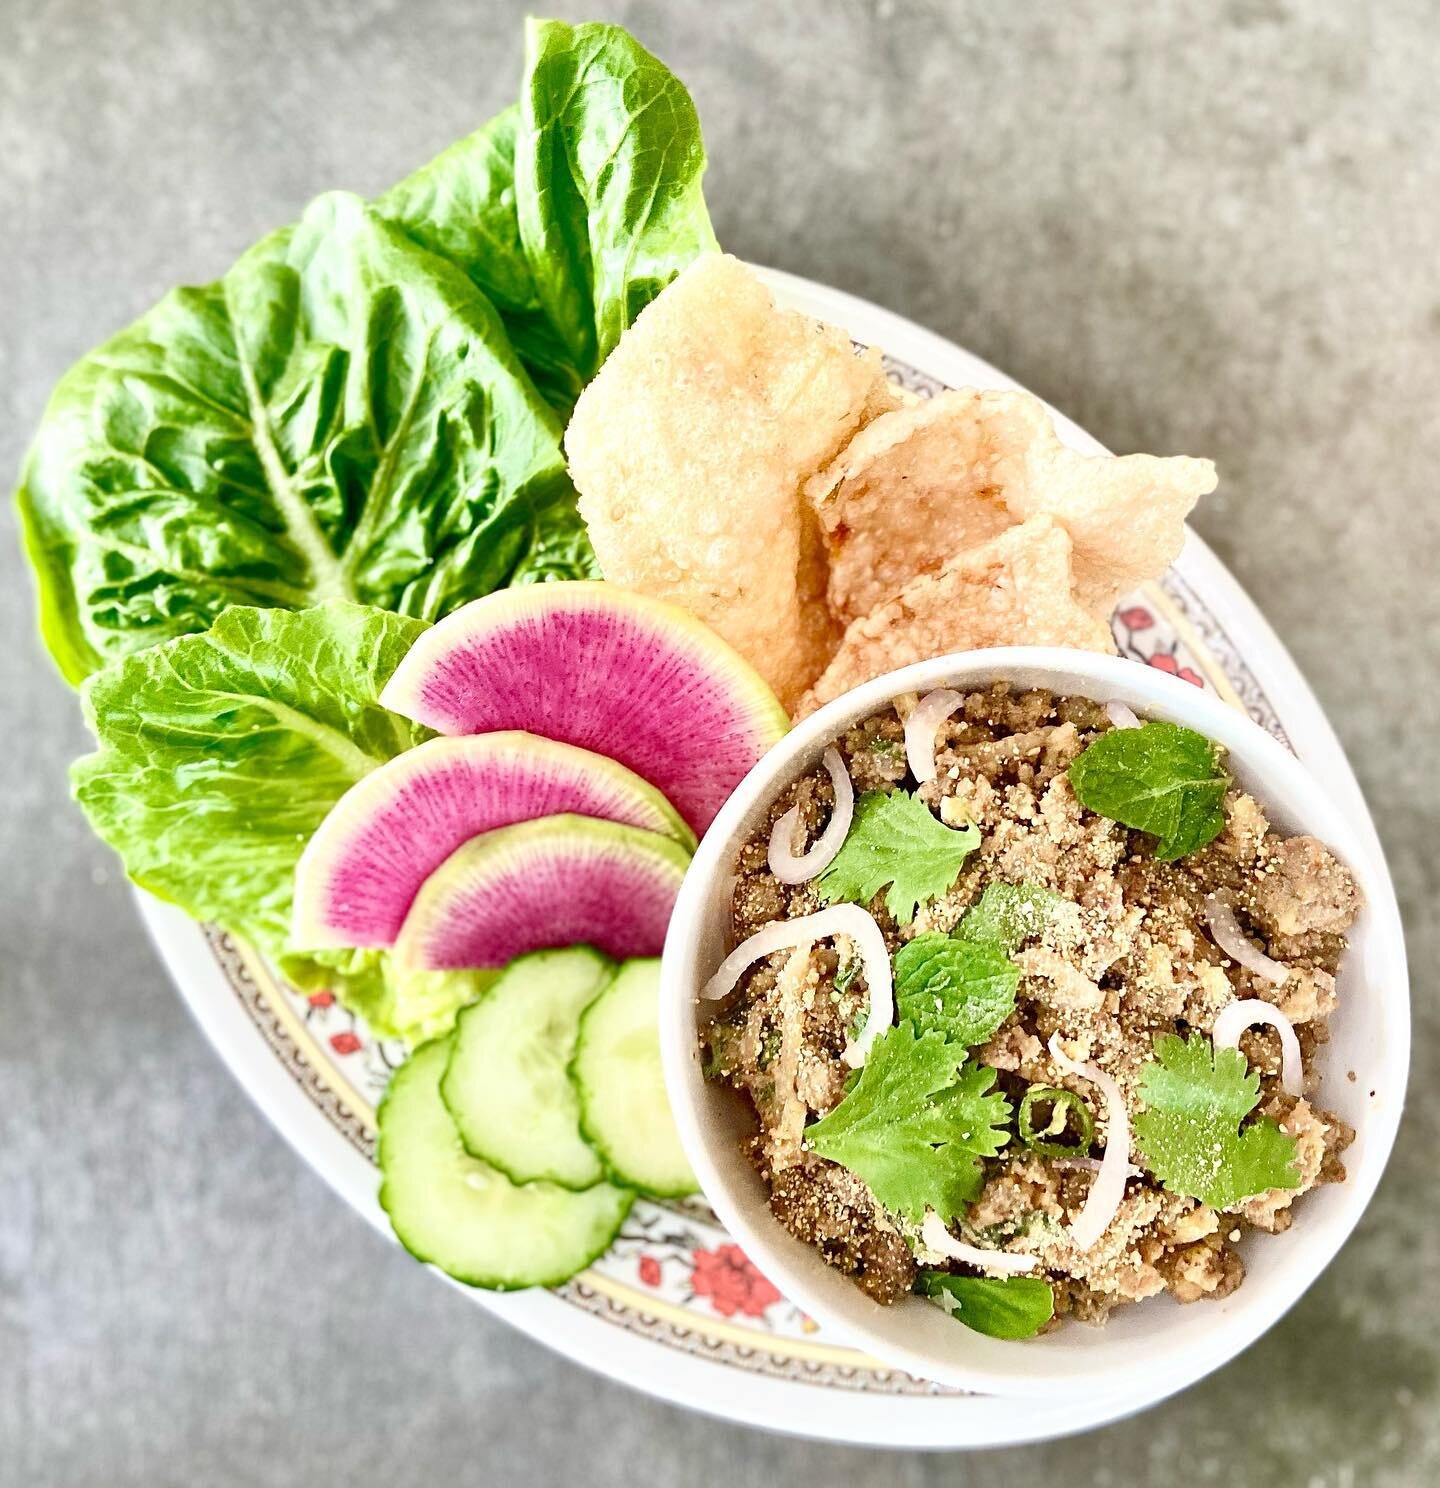 We Laab You 💕 Our bright, punchy, herbaceous beef laab salad with lemongrass, toasted chili oil, lime &amp; toasted rice powder with crunchy vegetables &amp; shrimp chips for scooping will have your tastebuds feeling like it&rsquo;s spring!